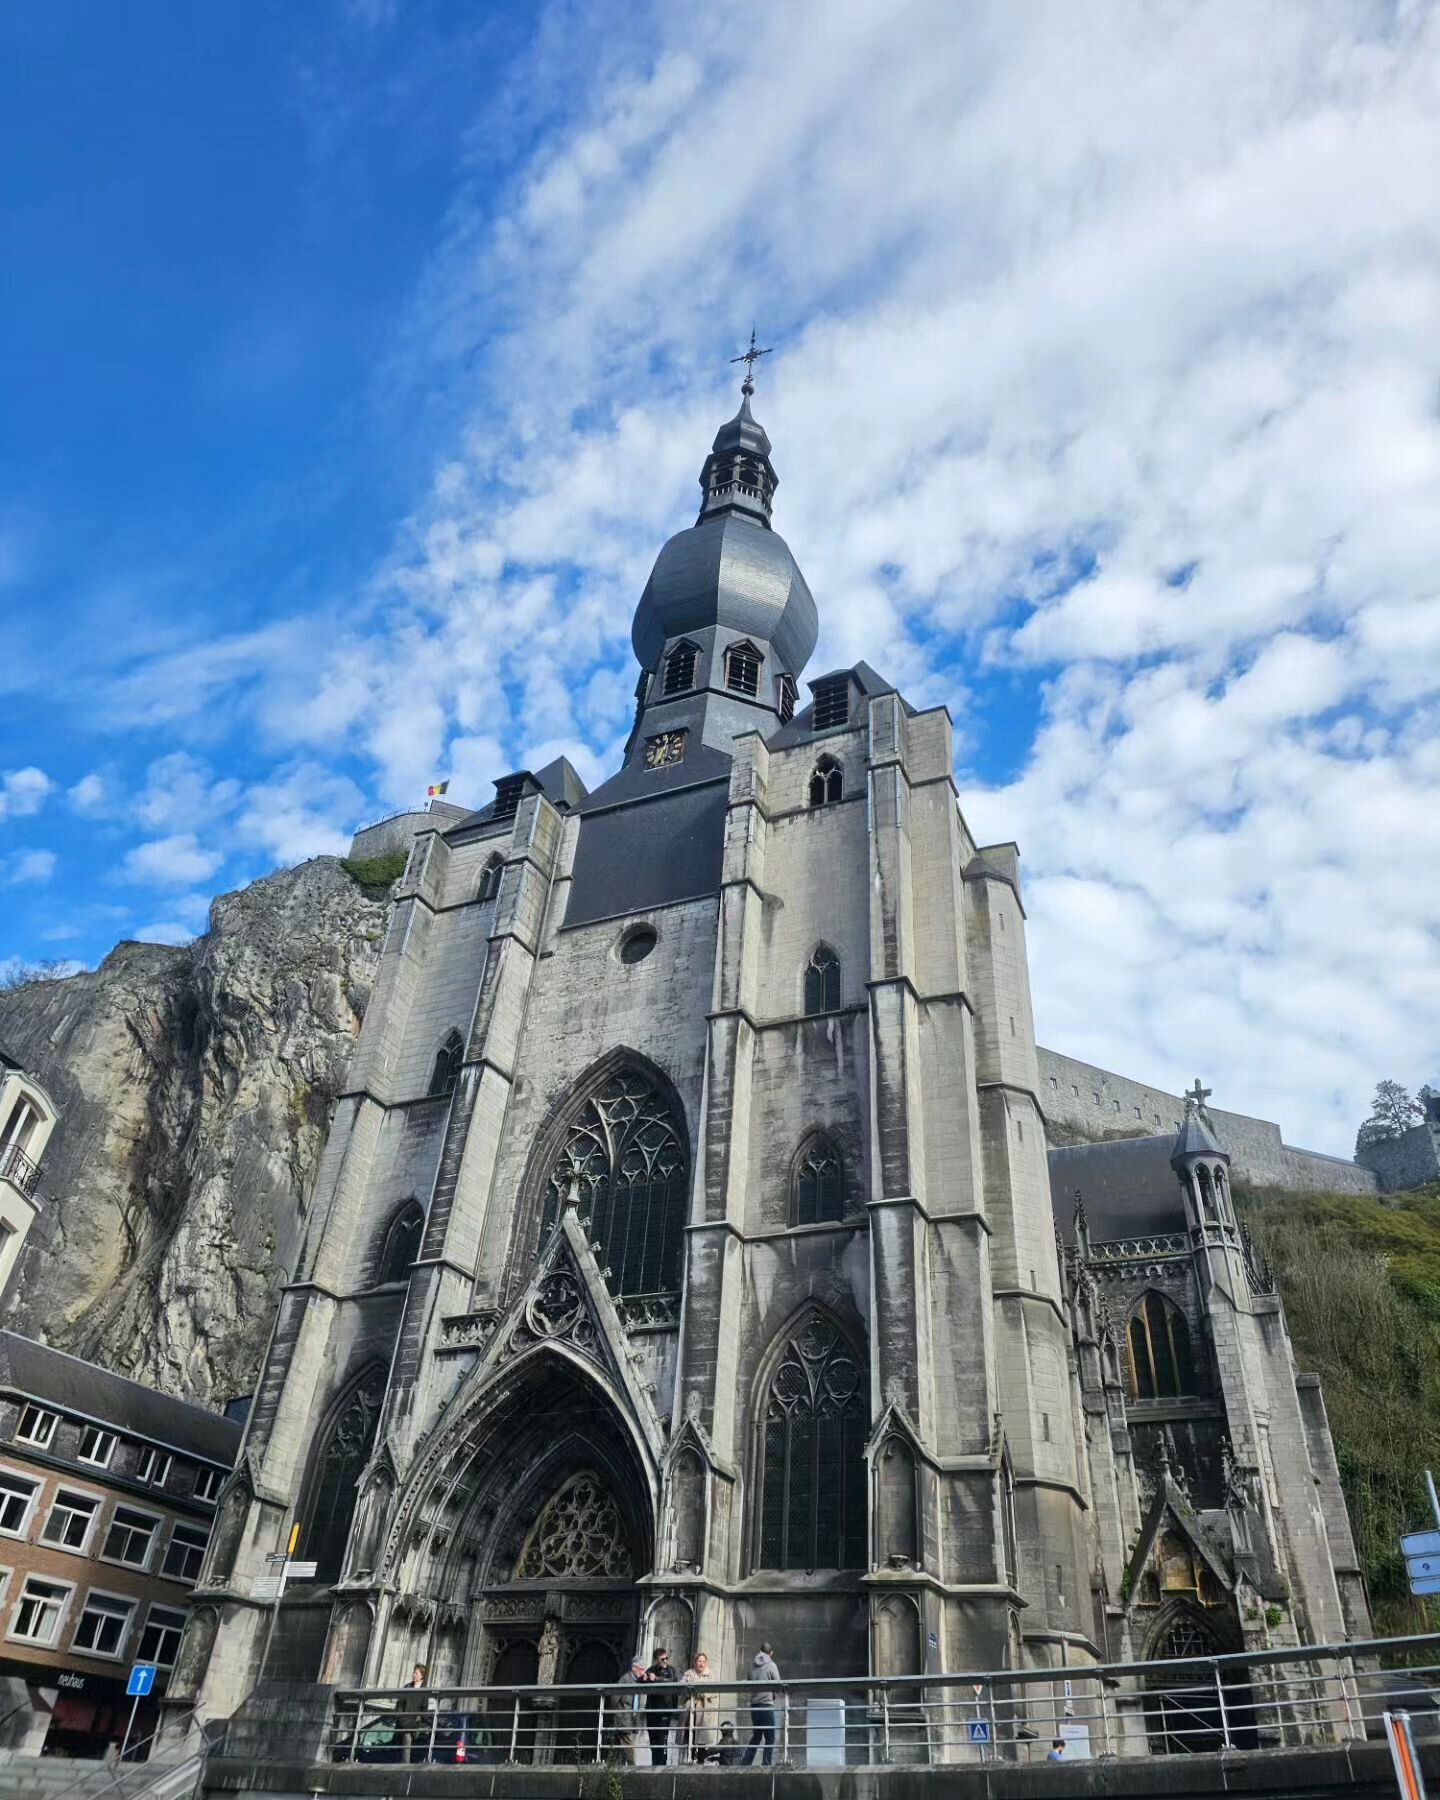 Had a wonderful weekend in Belgium and Luxembourg! Rented a cute little Mini Cooper and explored Dinant and Luxembourg City (was only planning on doing a day trip, but the flight delay the night before meant I was running on less than four hours of s